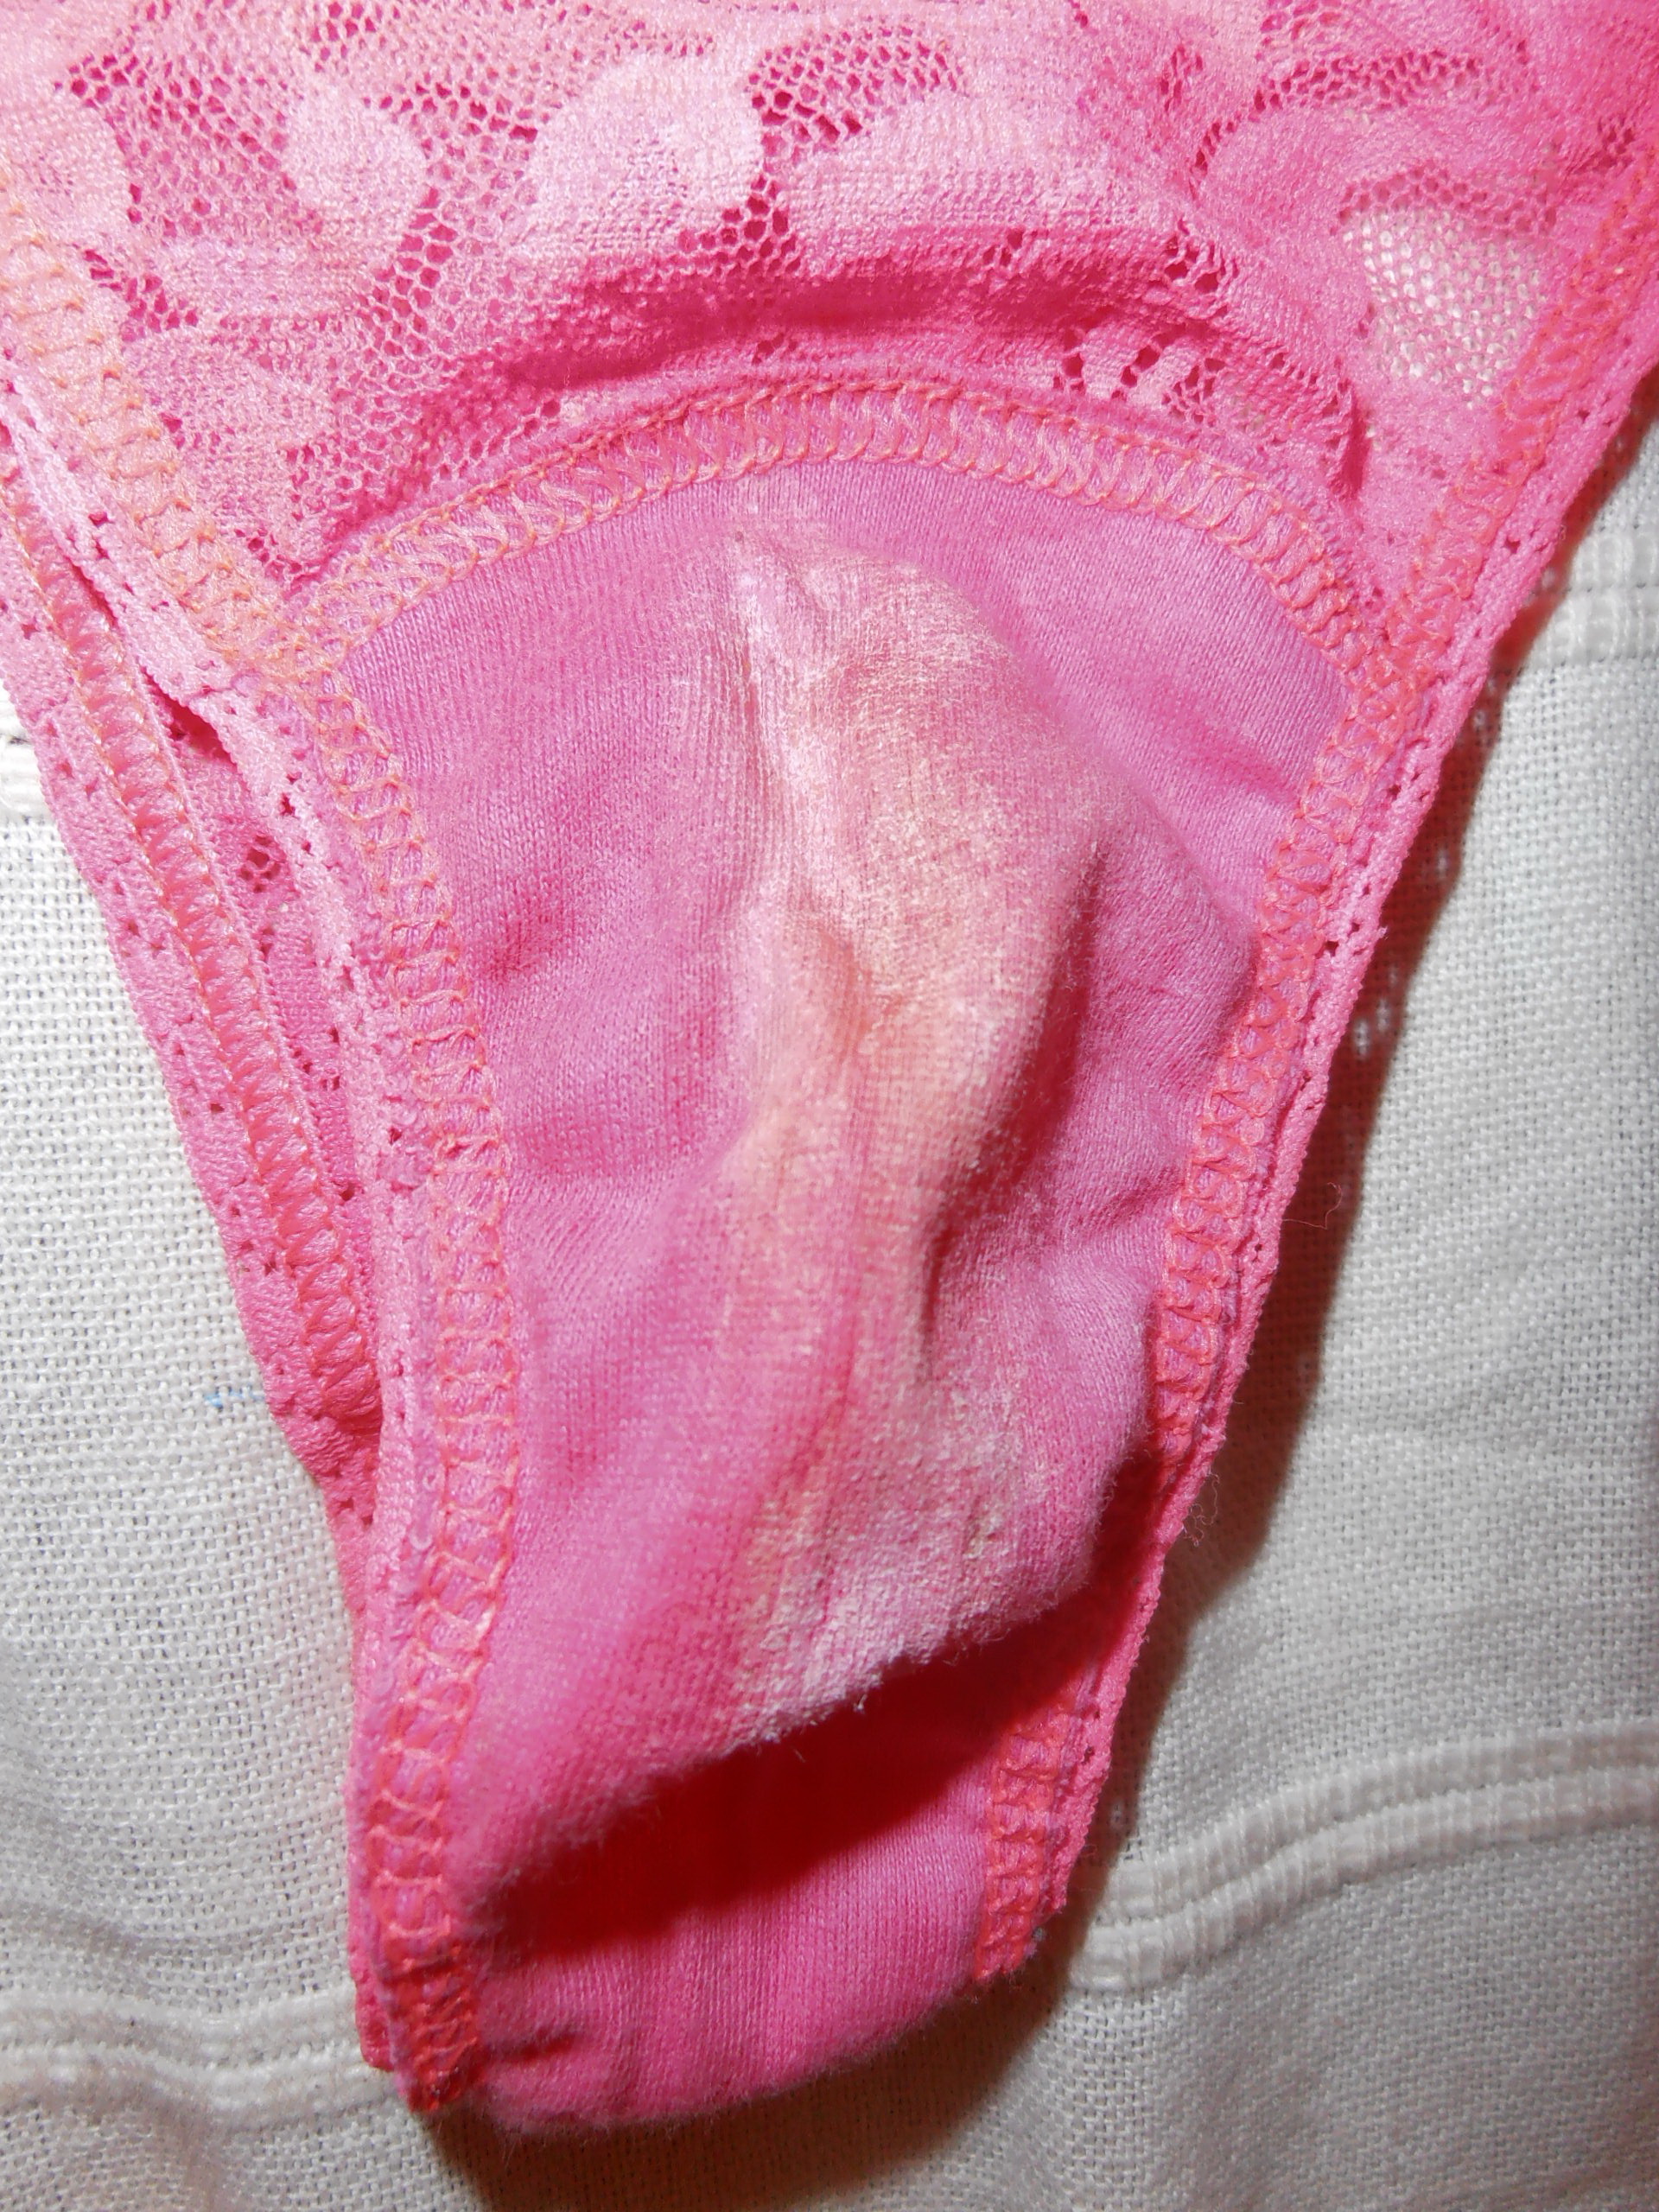 Dirty Panty Gallery